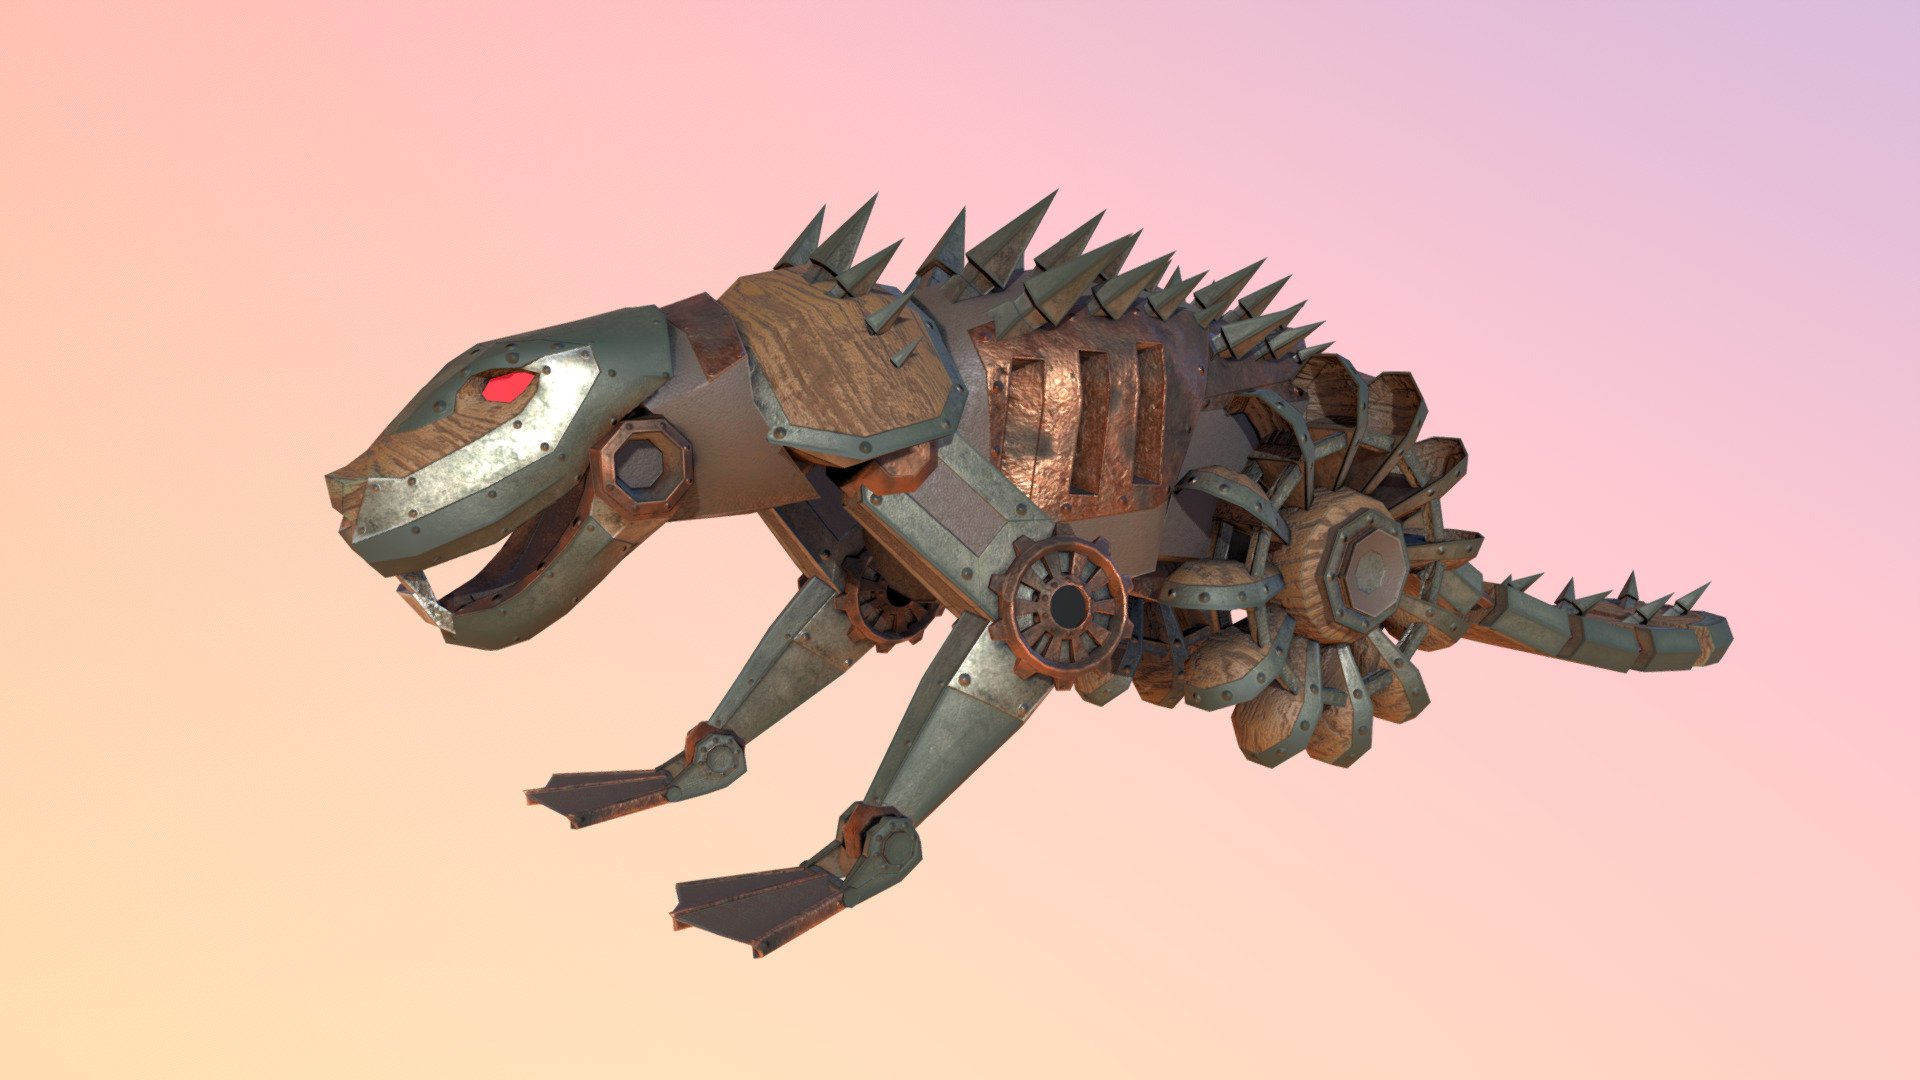 Steampunk Beaver for the game “Darco - Reign of Elements” 

Now on Steam of
TP Studios

Model &amp; Texture by me - Steampunk Beaver Model - 3D model by Anakaii 3d model